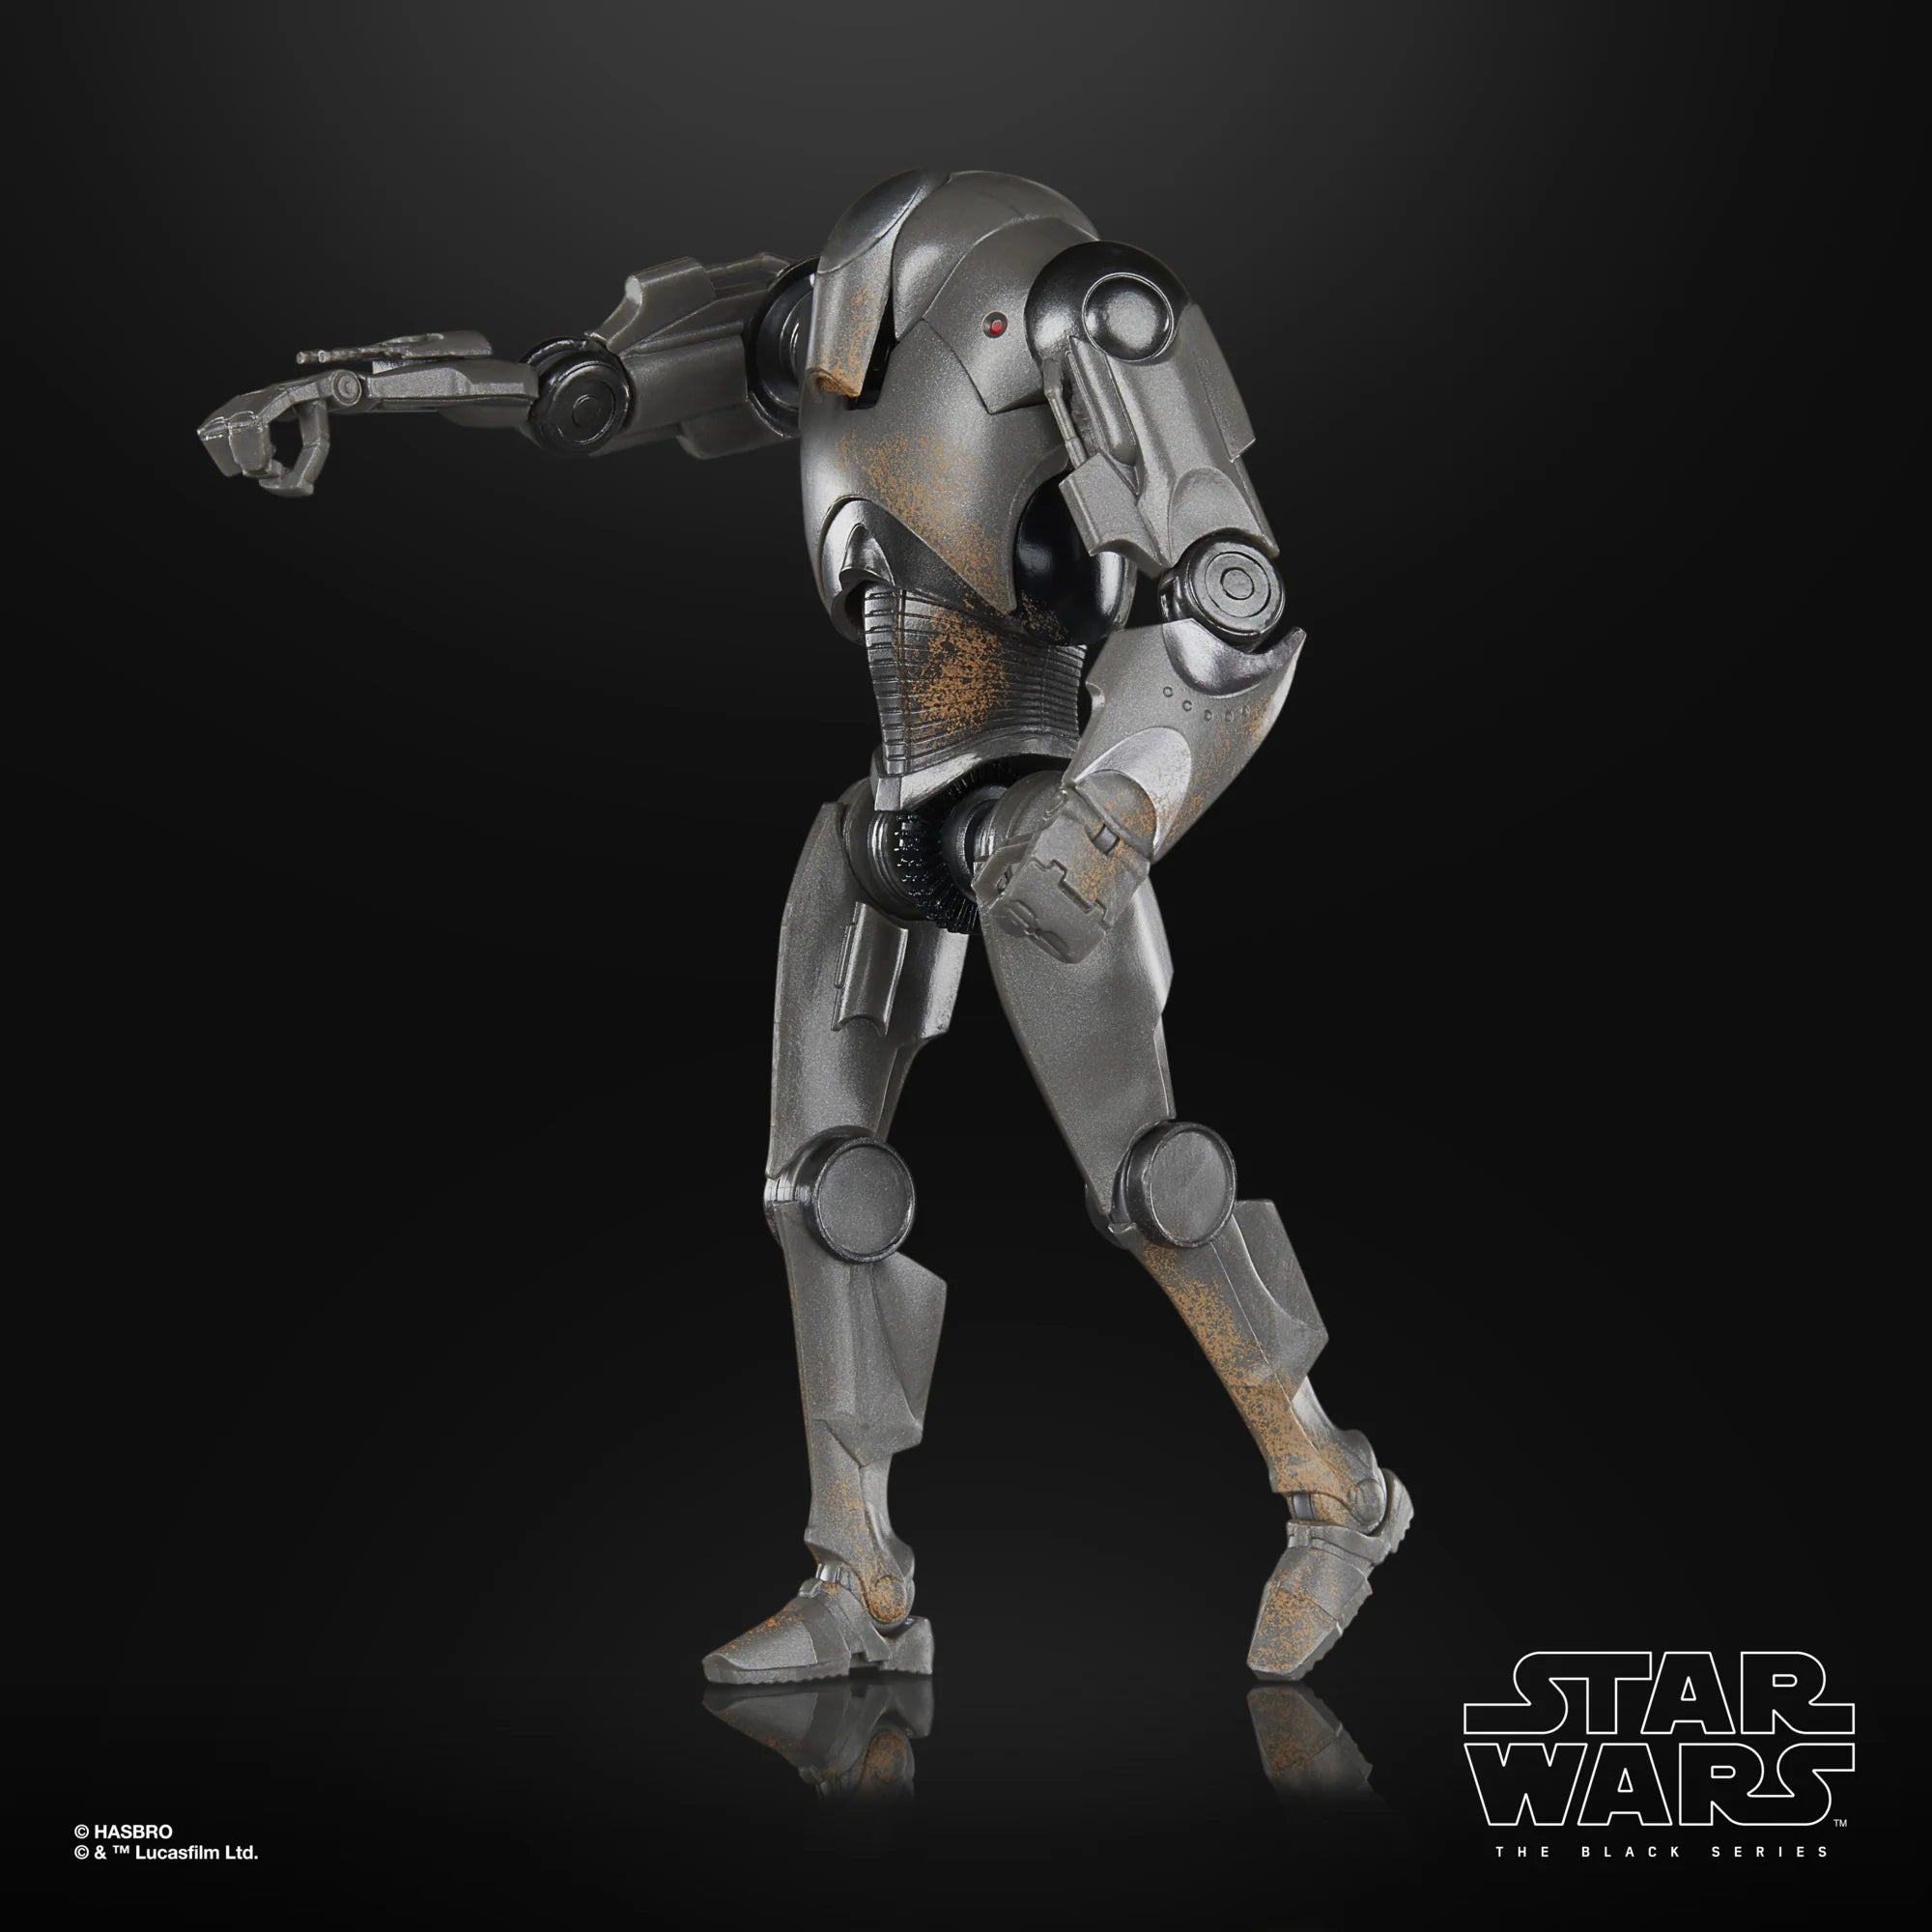 Hasbro Star Wars Black Series Attack of the Clones C-3PO (B1 Battle Droid Body and Super Battle Droid) Exclusive Action Figure